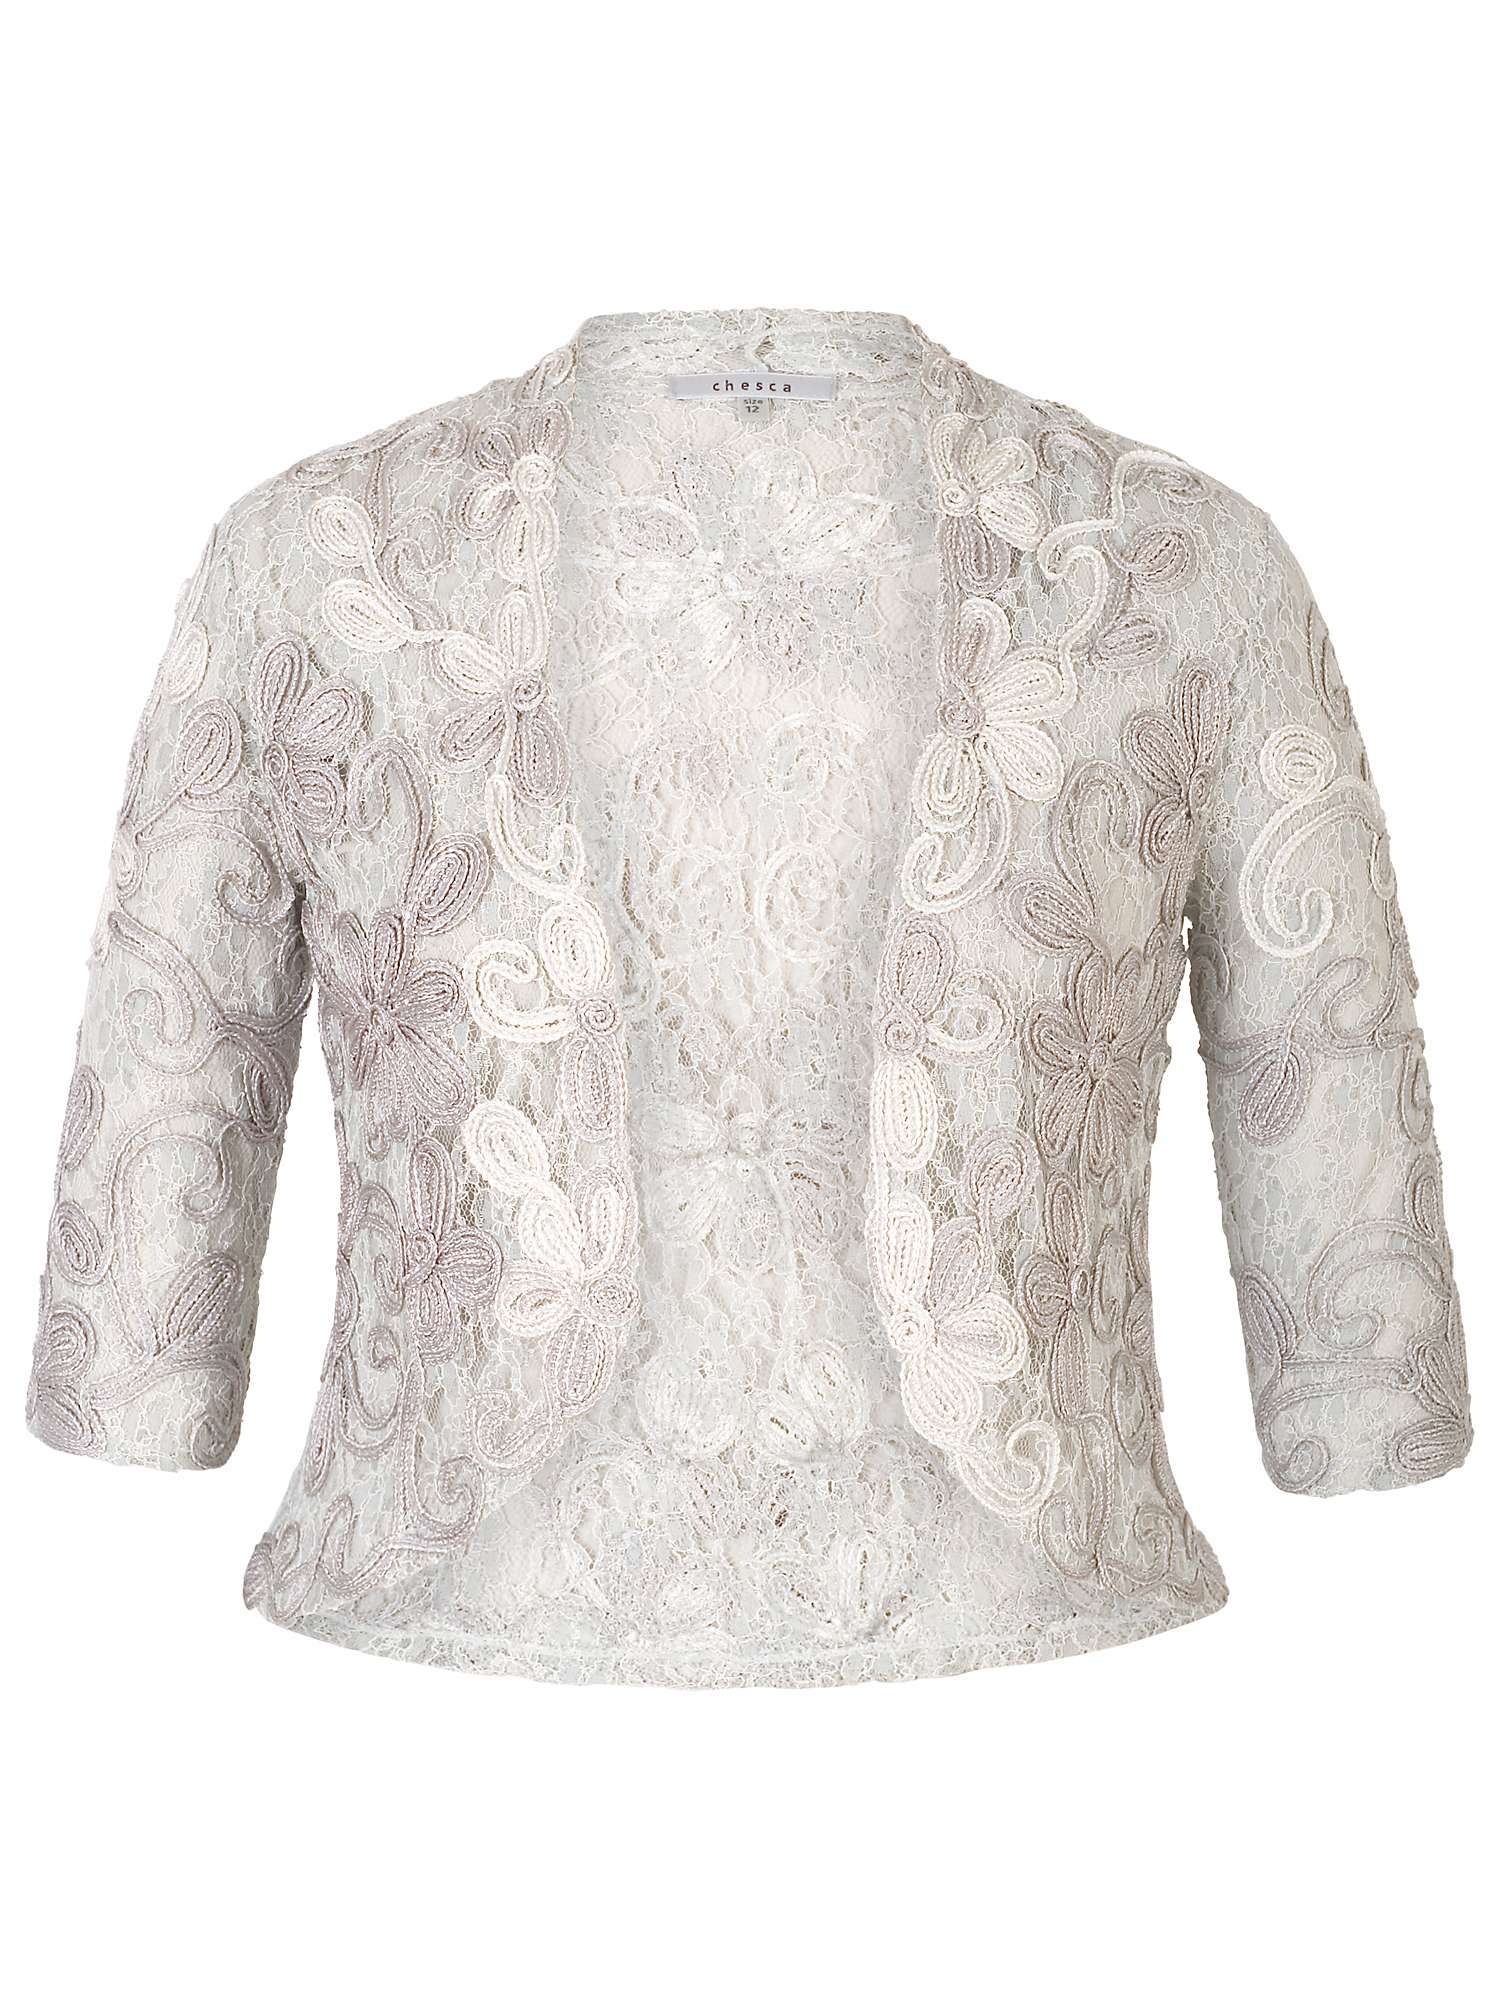 Buy Chesca Ombre Cornelli Lace Jacket, Ivory Online at johnlewis.com